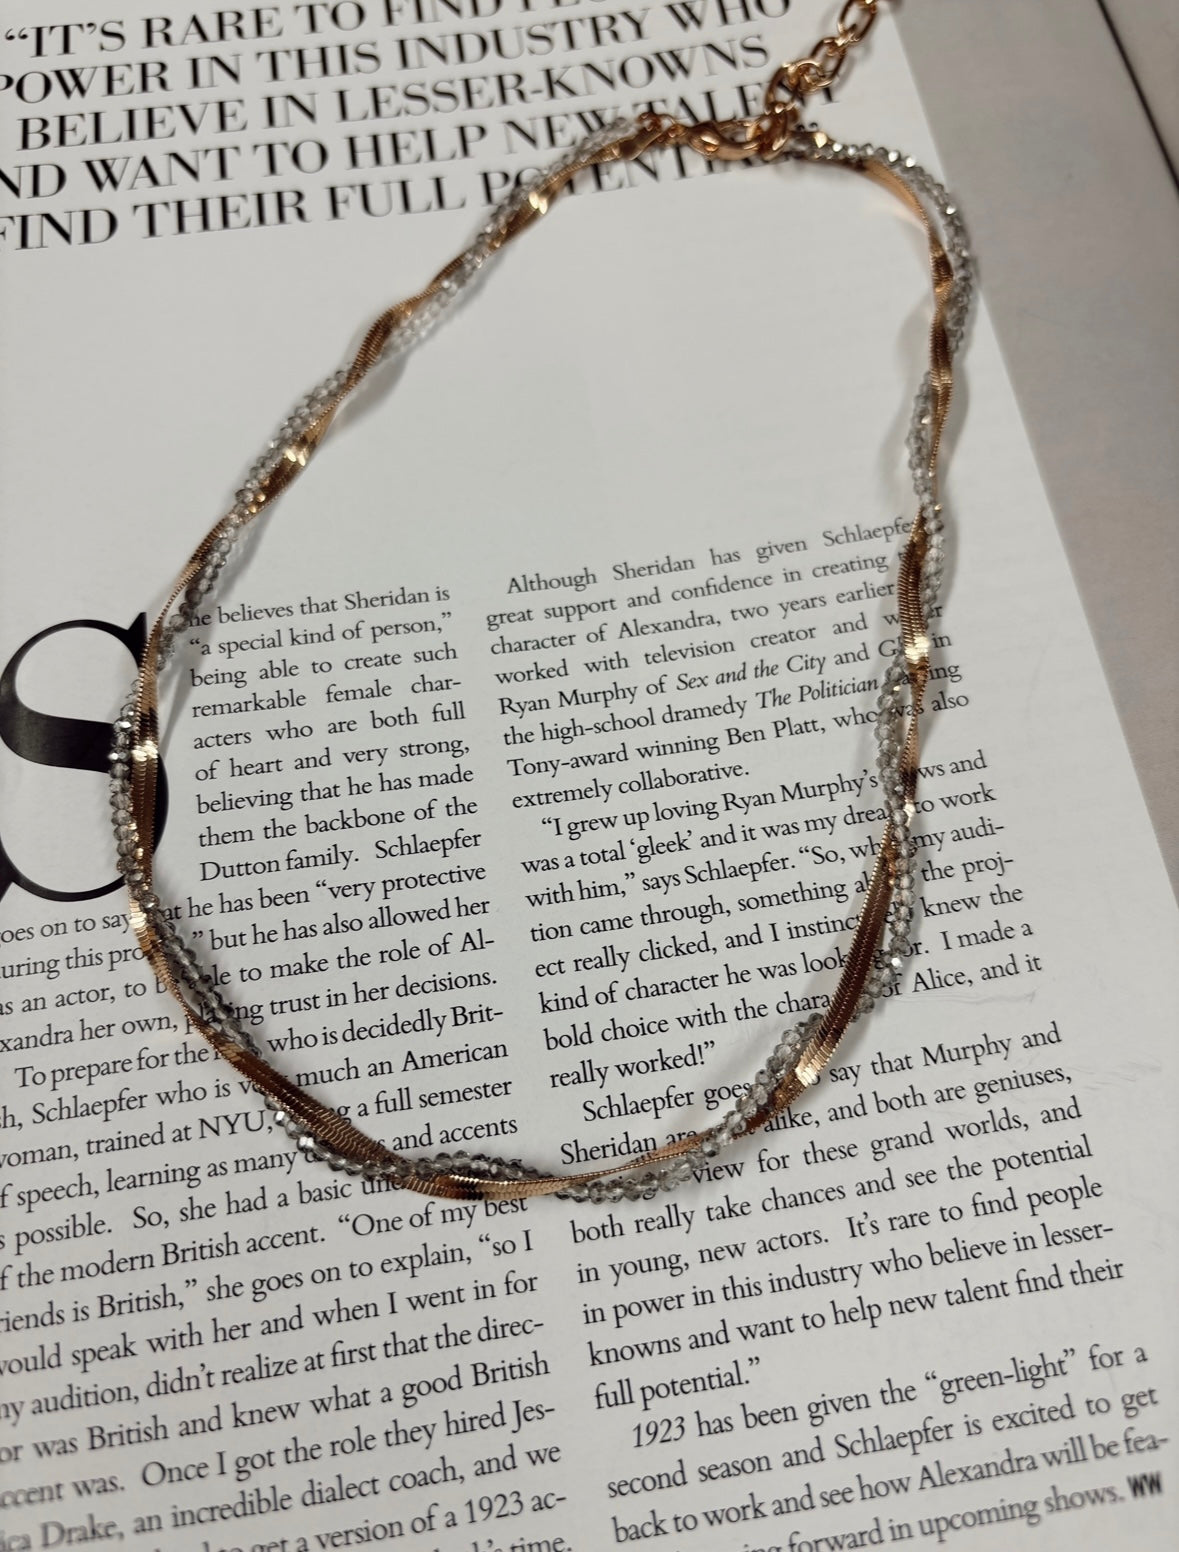 The Sandy Gold Intertwined Necklace